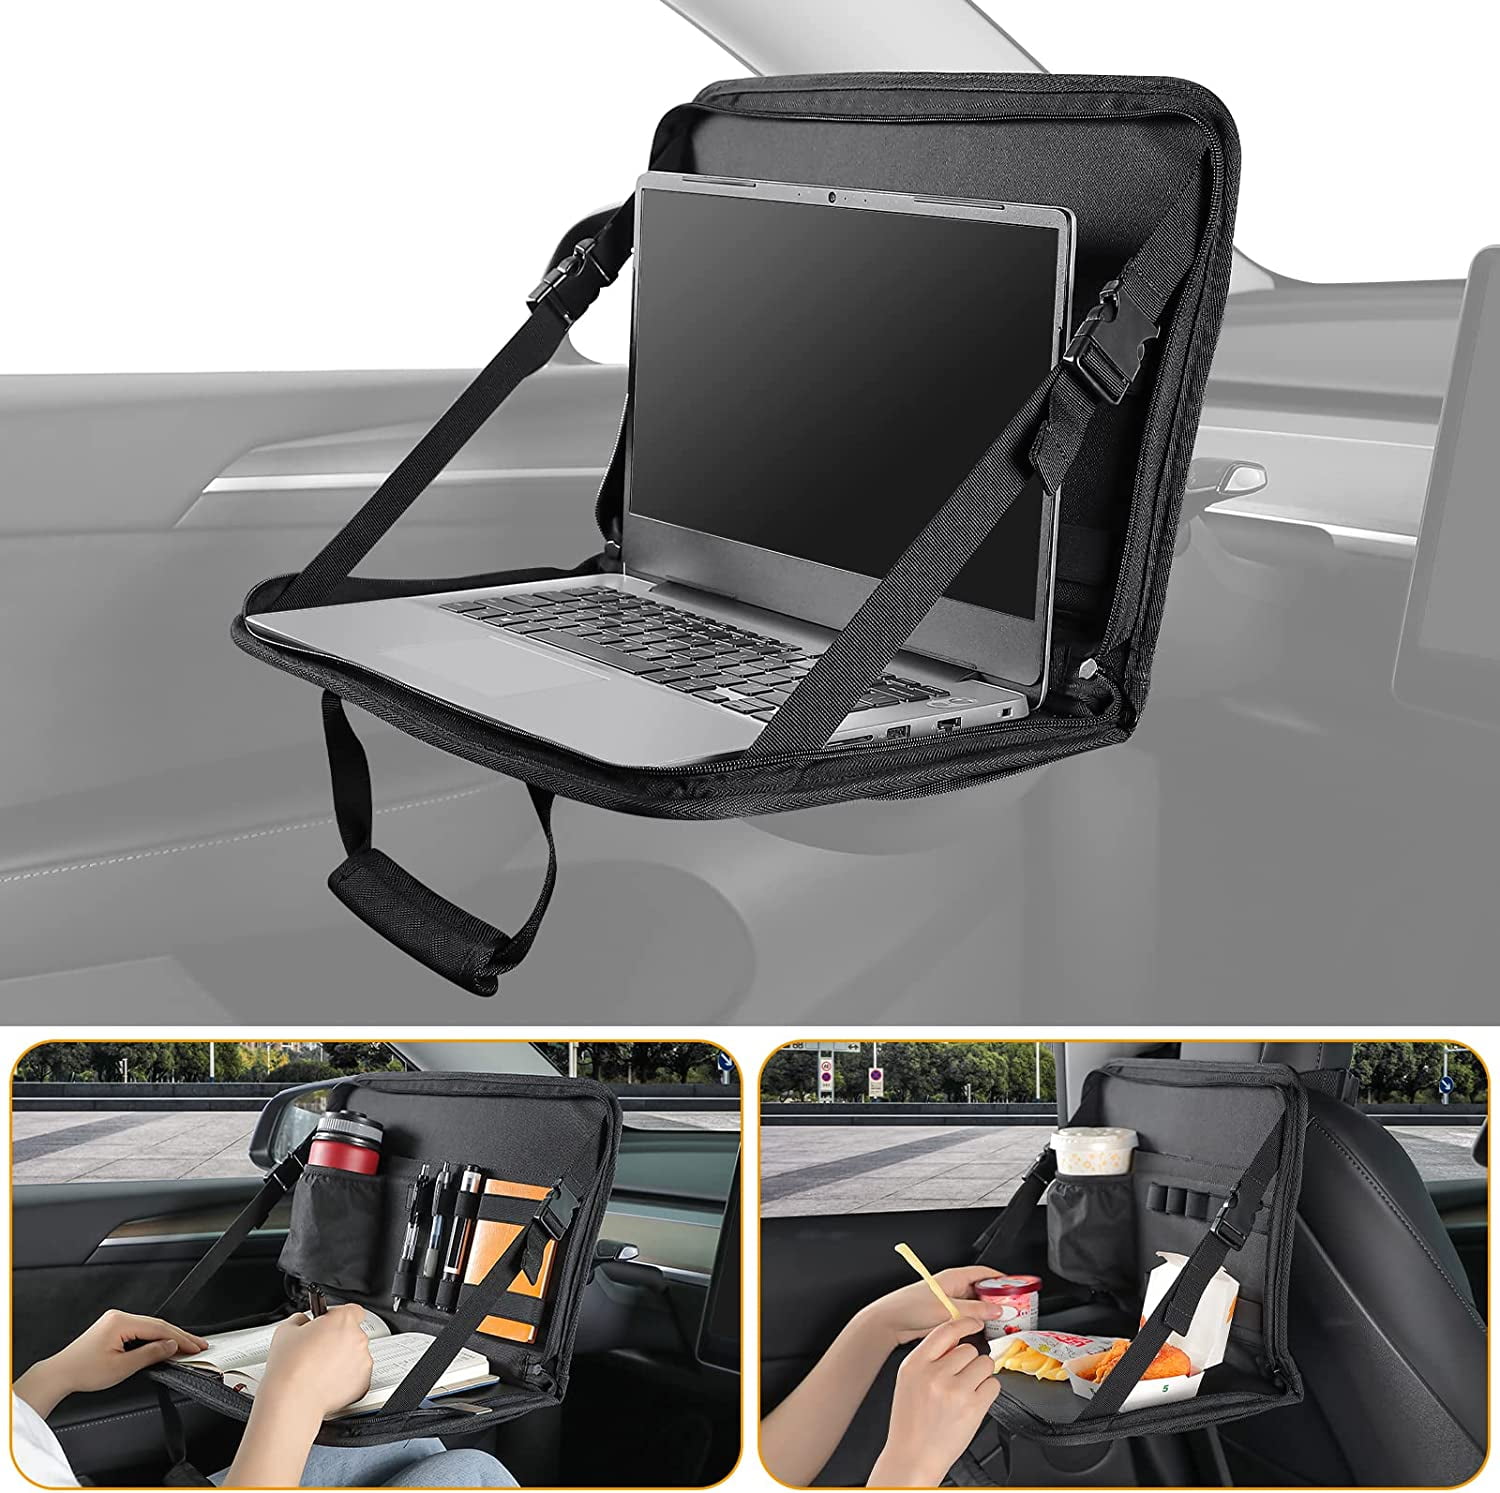 Steering Wheel Car Table Tray For Laptop Food Dining Writing